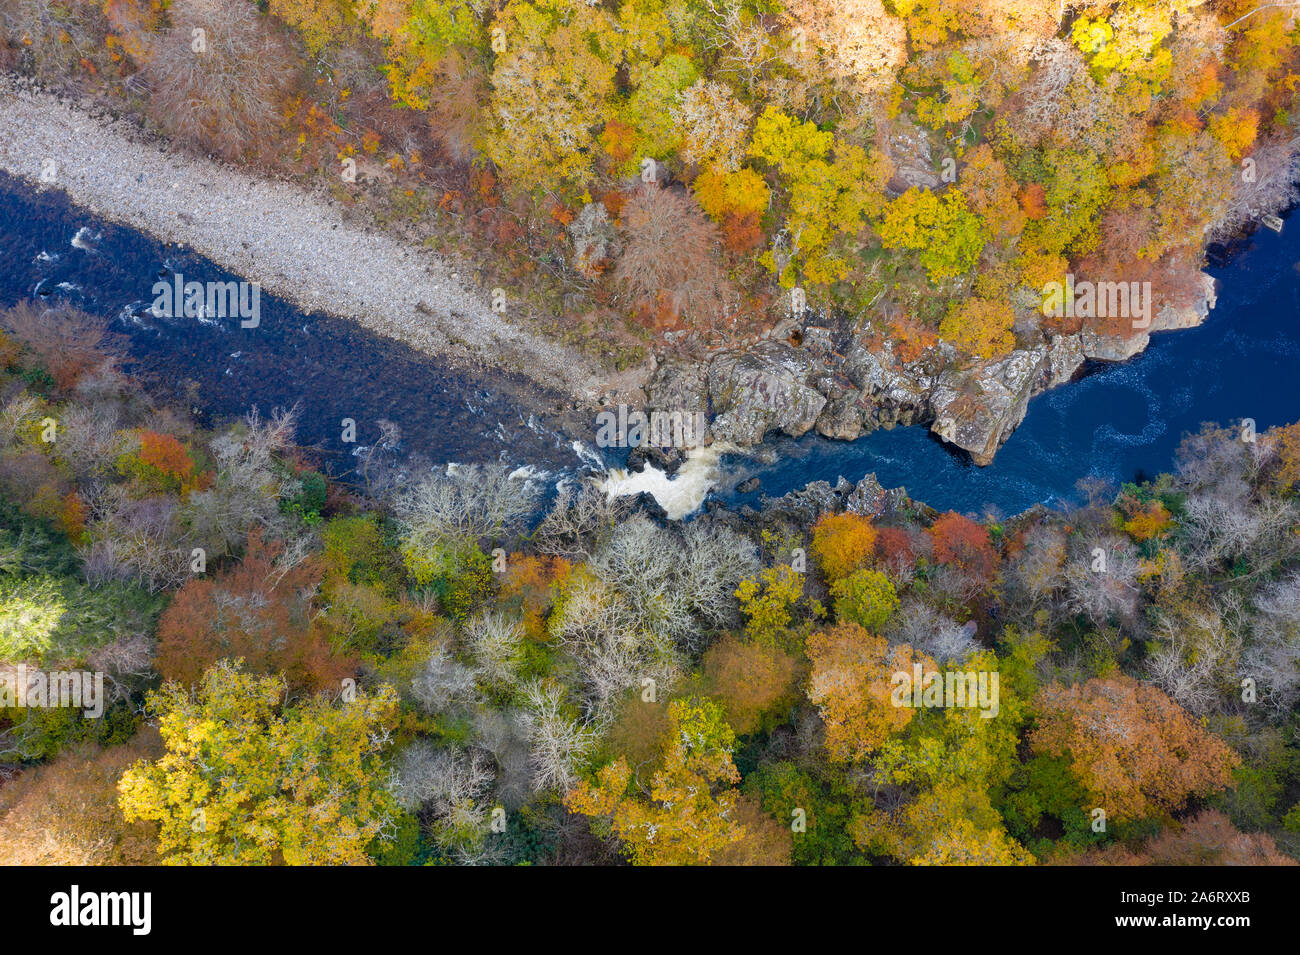 Killiecrankie, Perthshire, Scotland, UK. 28th October 2019. Autumnal colours in trees beside the River Garry seen from a drone at Killiecrankie in Perthshire. Pictured; Famous Soldier's Leap, the spot where a Redcoat soldier leapt 18ft across the raging River Garry, fleeing the Jacobites. Iain Masterton/Alamy Live News. Stock Photo